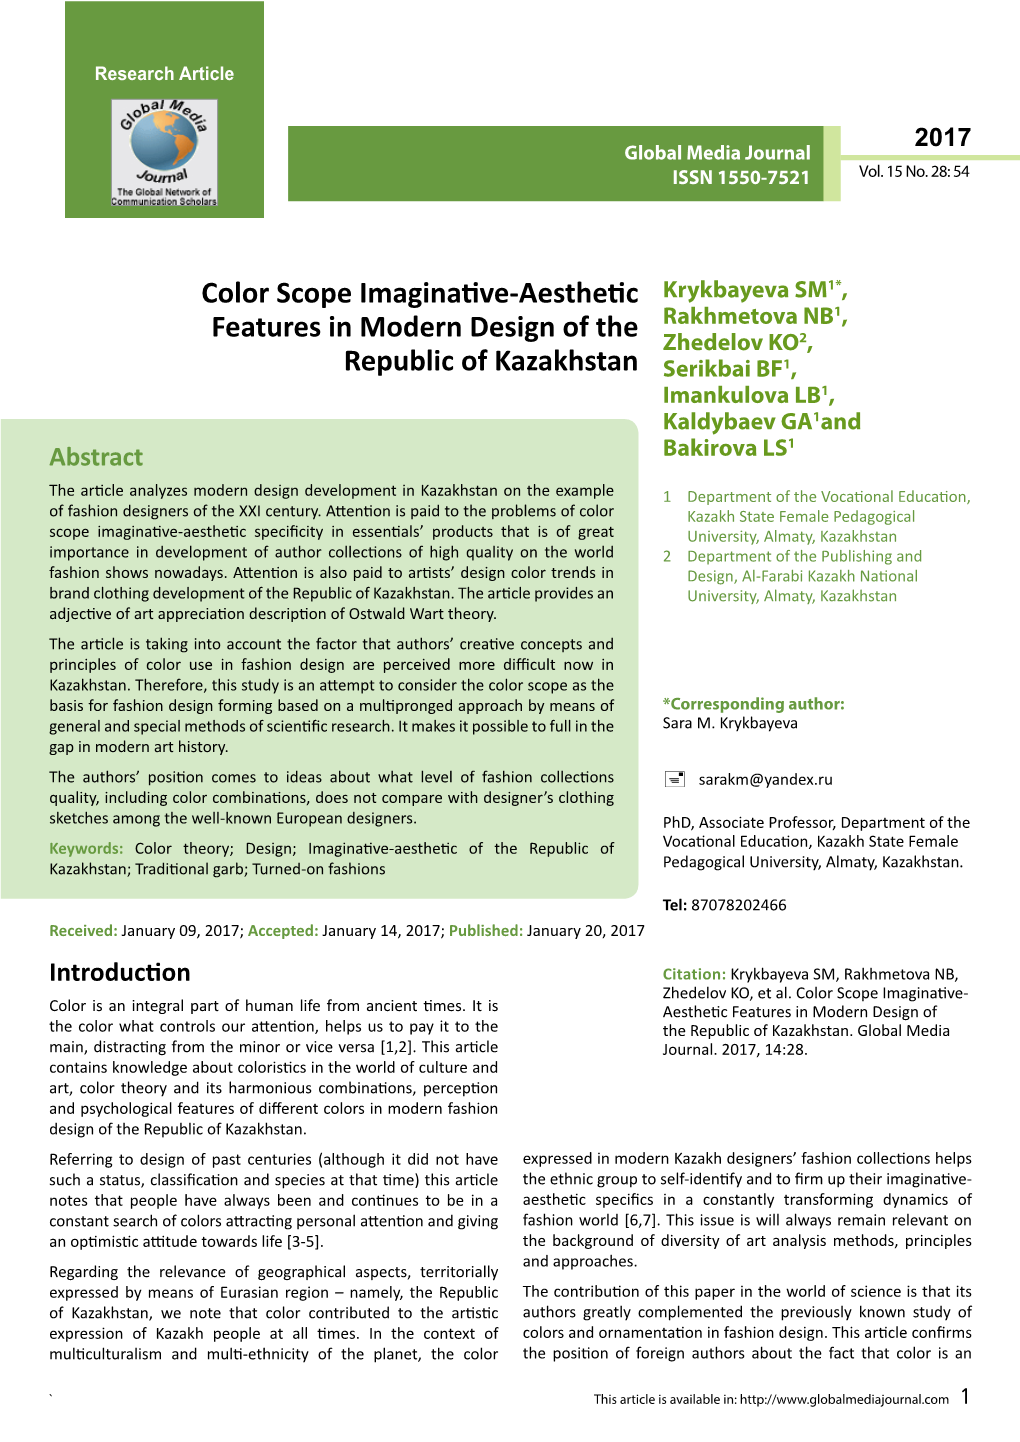 Color Scope Imaginative-Aesthetic Features in Modern Design of The